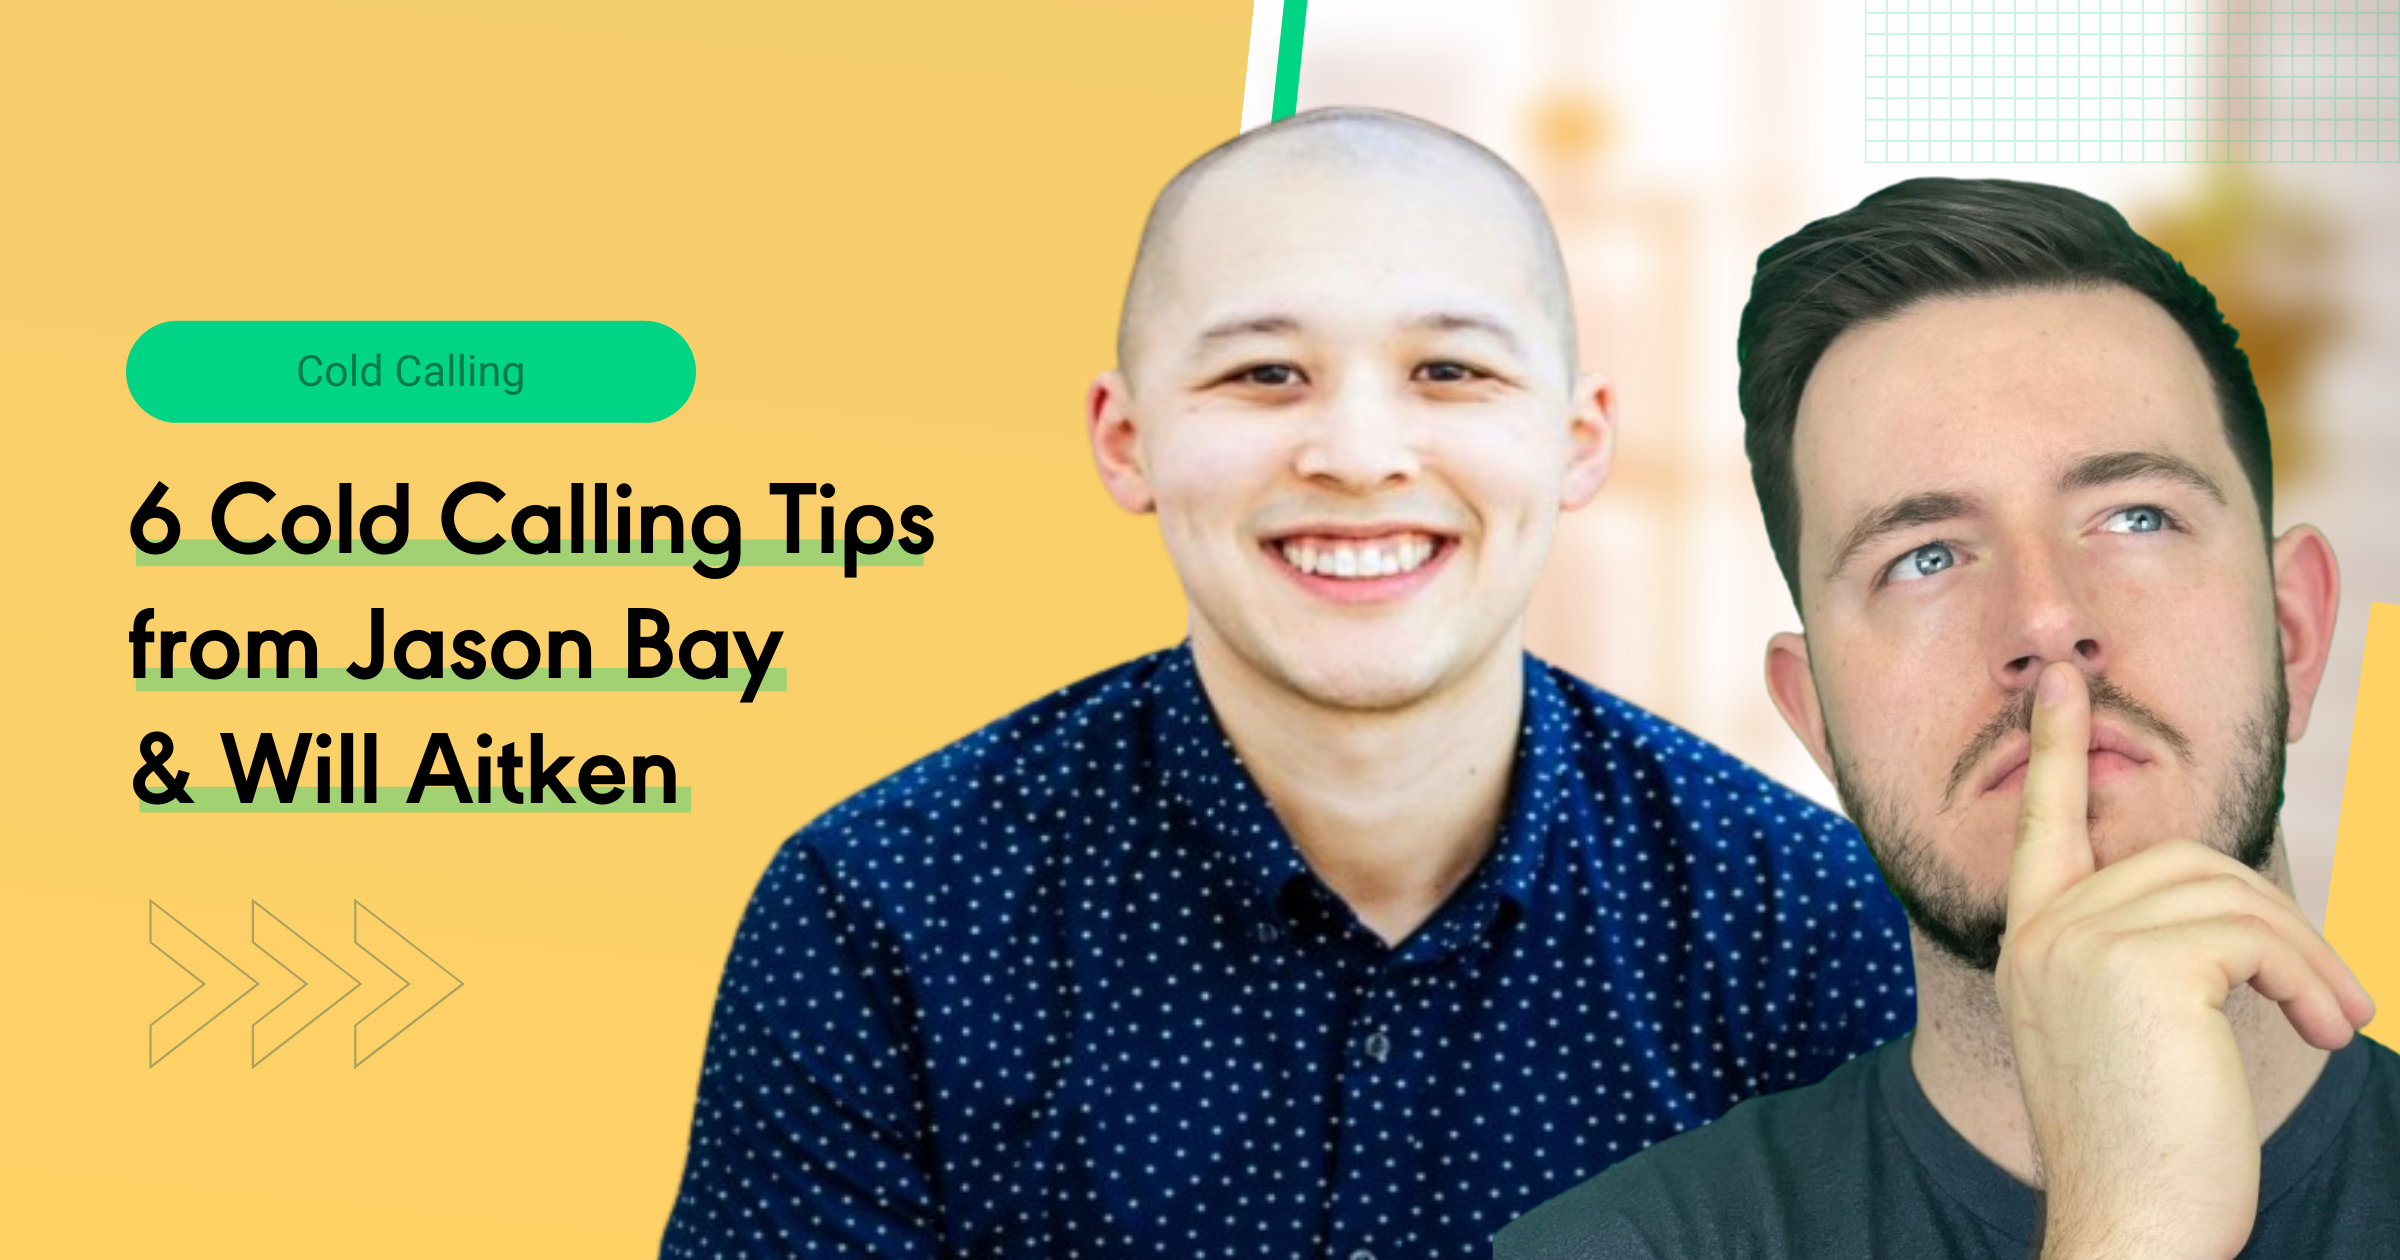 Cold Calling Tips from Jason Bay & Will Aitken